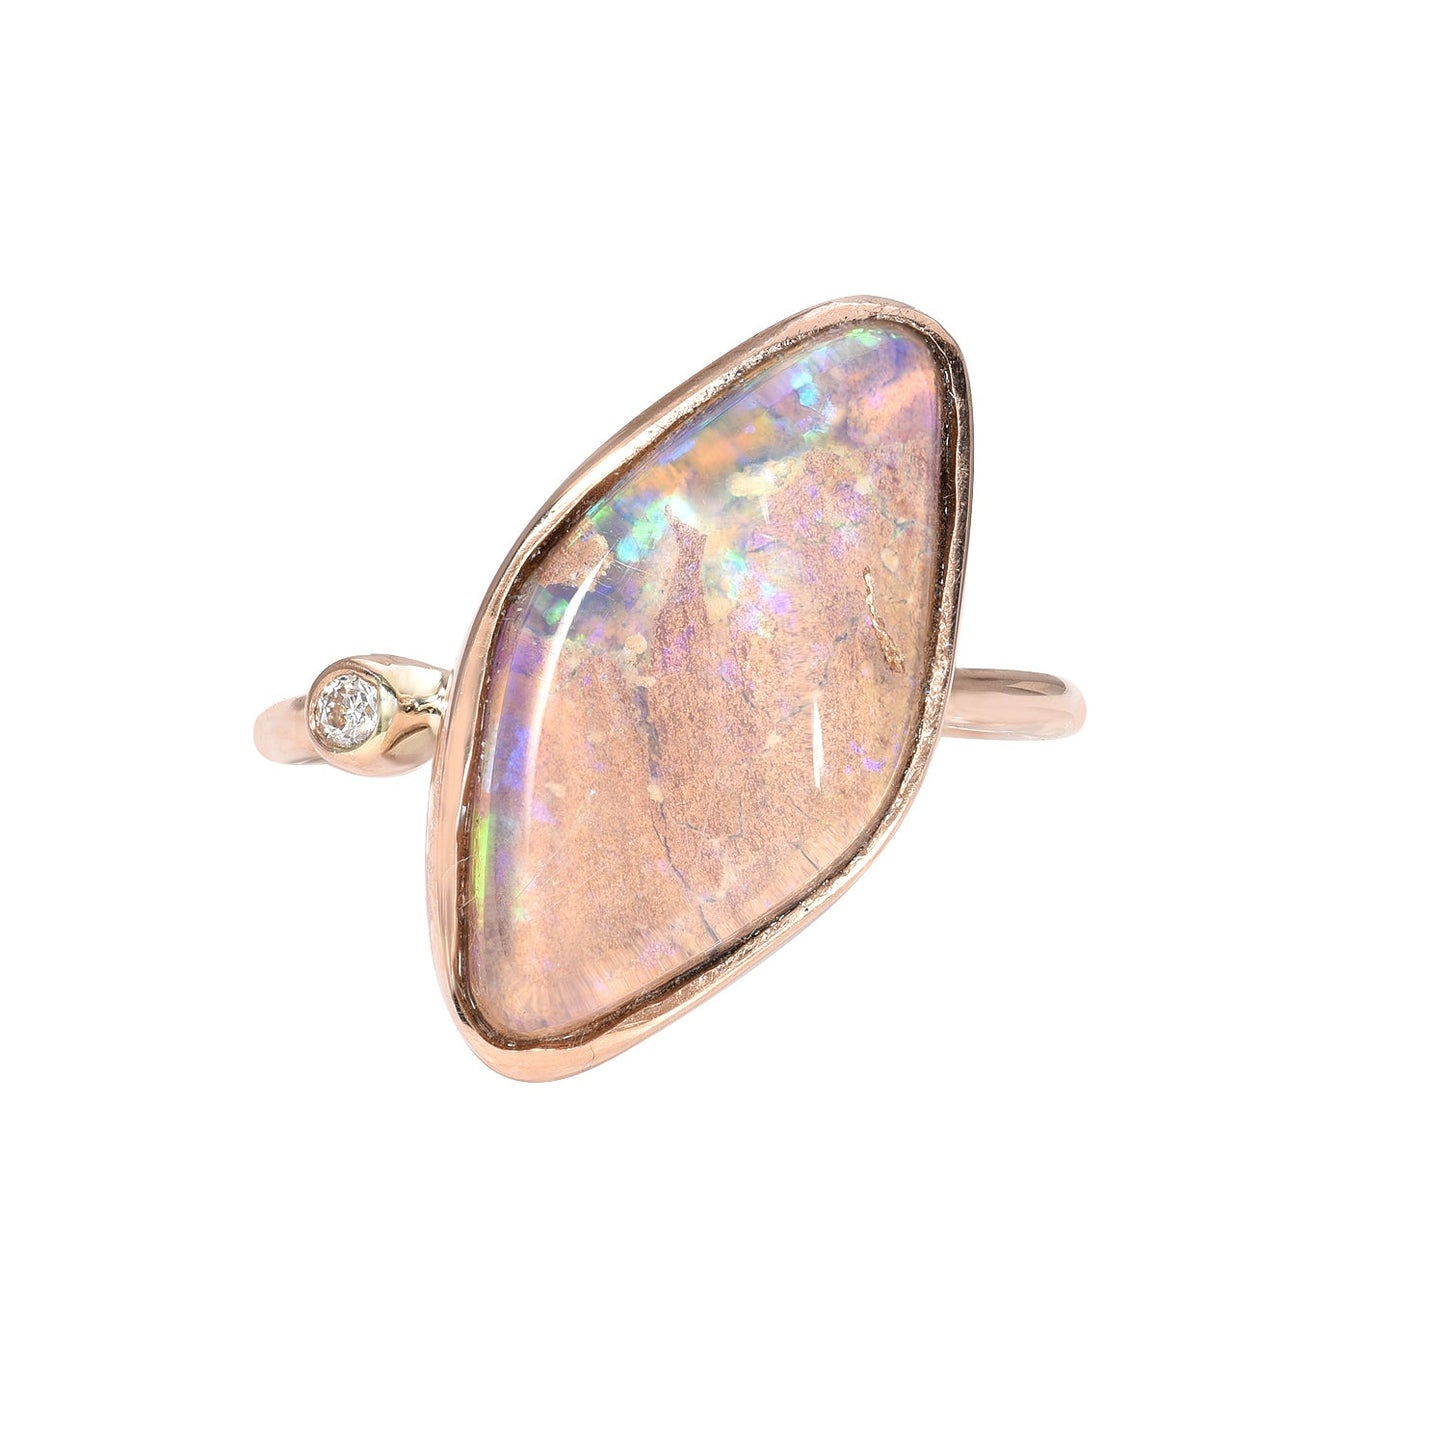 Zion Dali Australian Opal Ring by NIXIN Jewelry on white background. Rose gold opal ring.